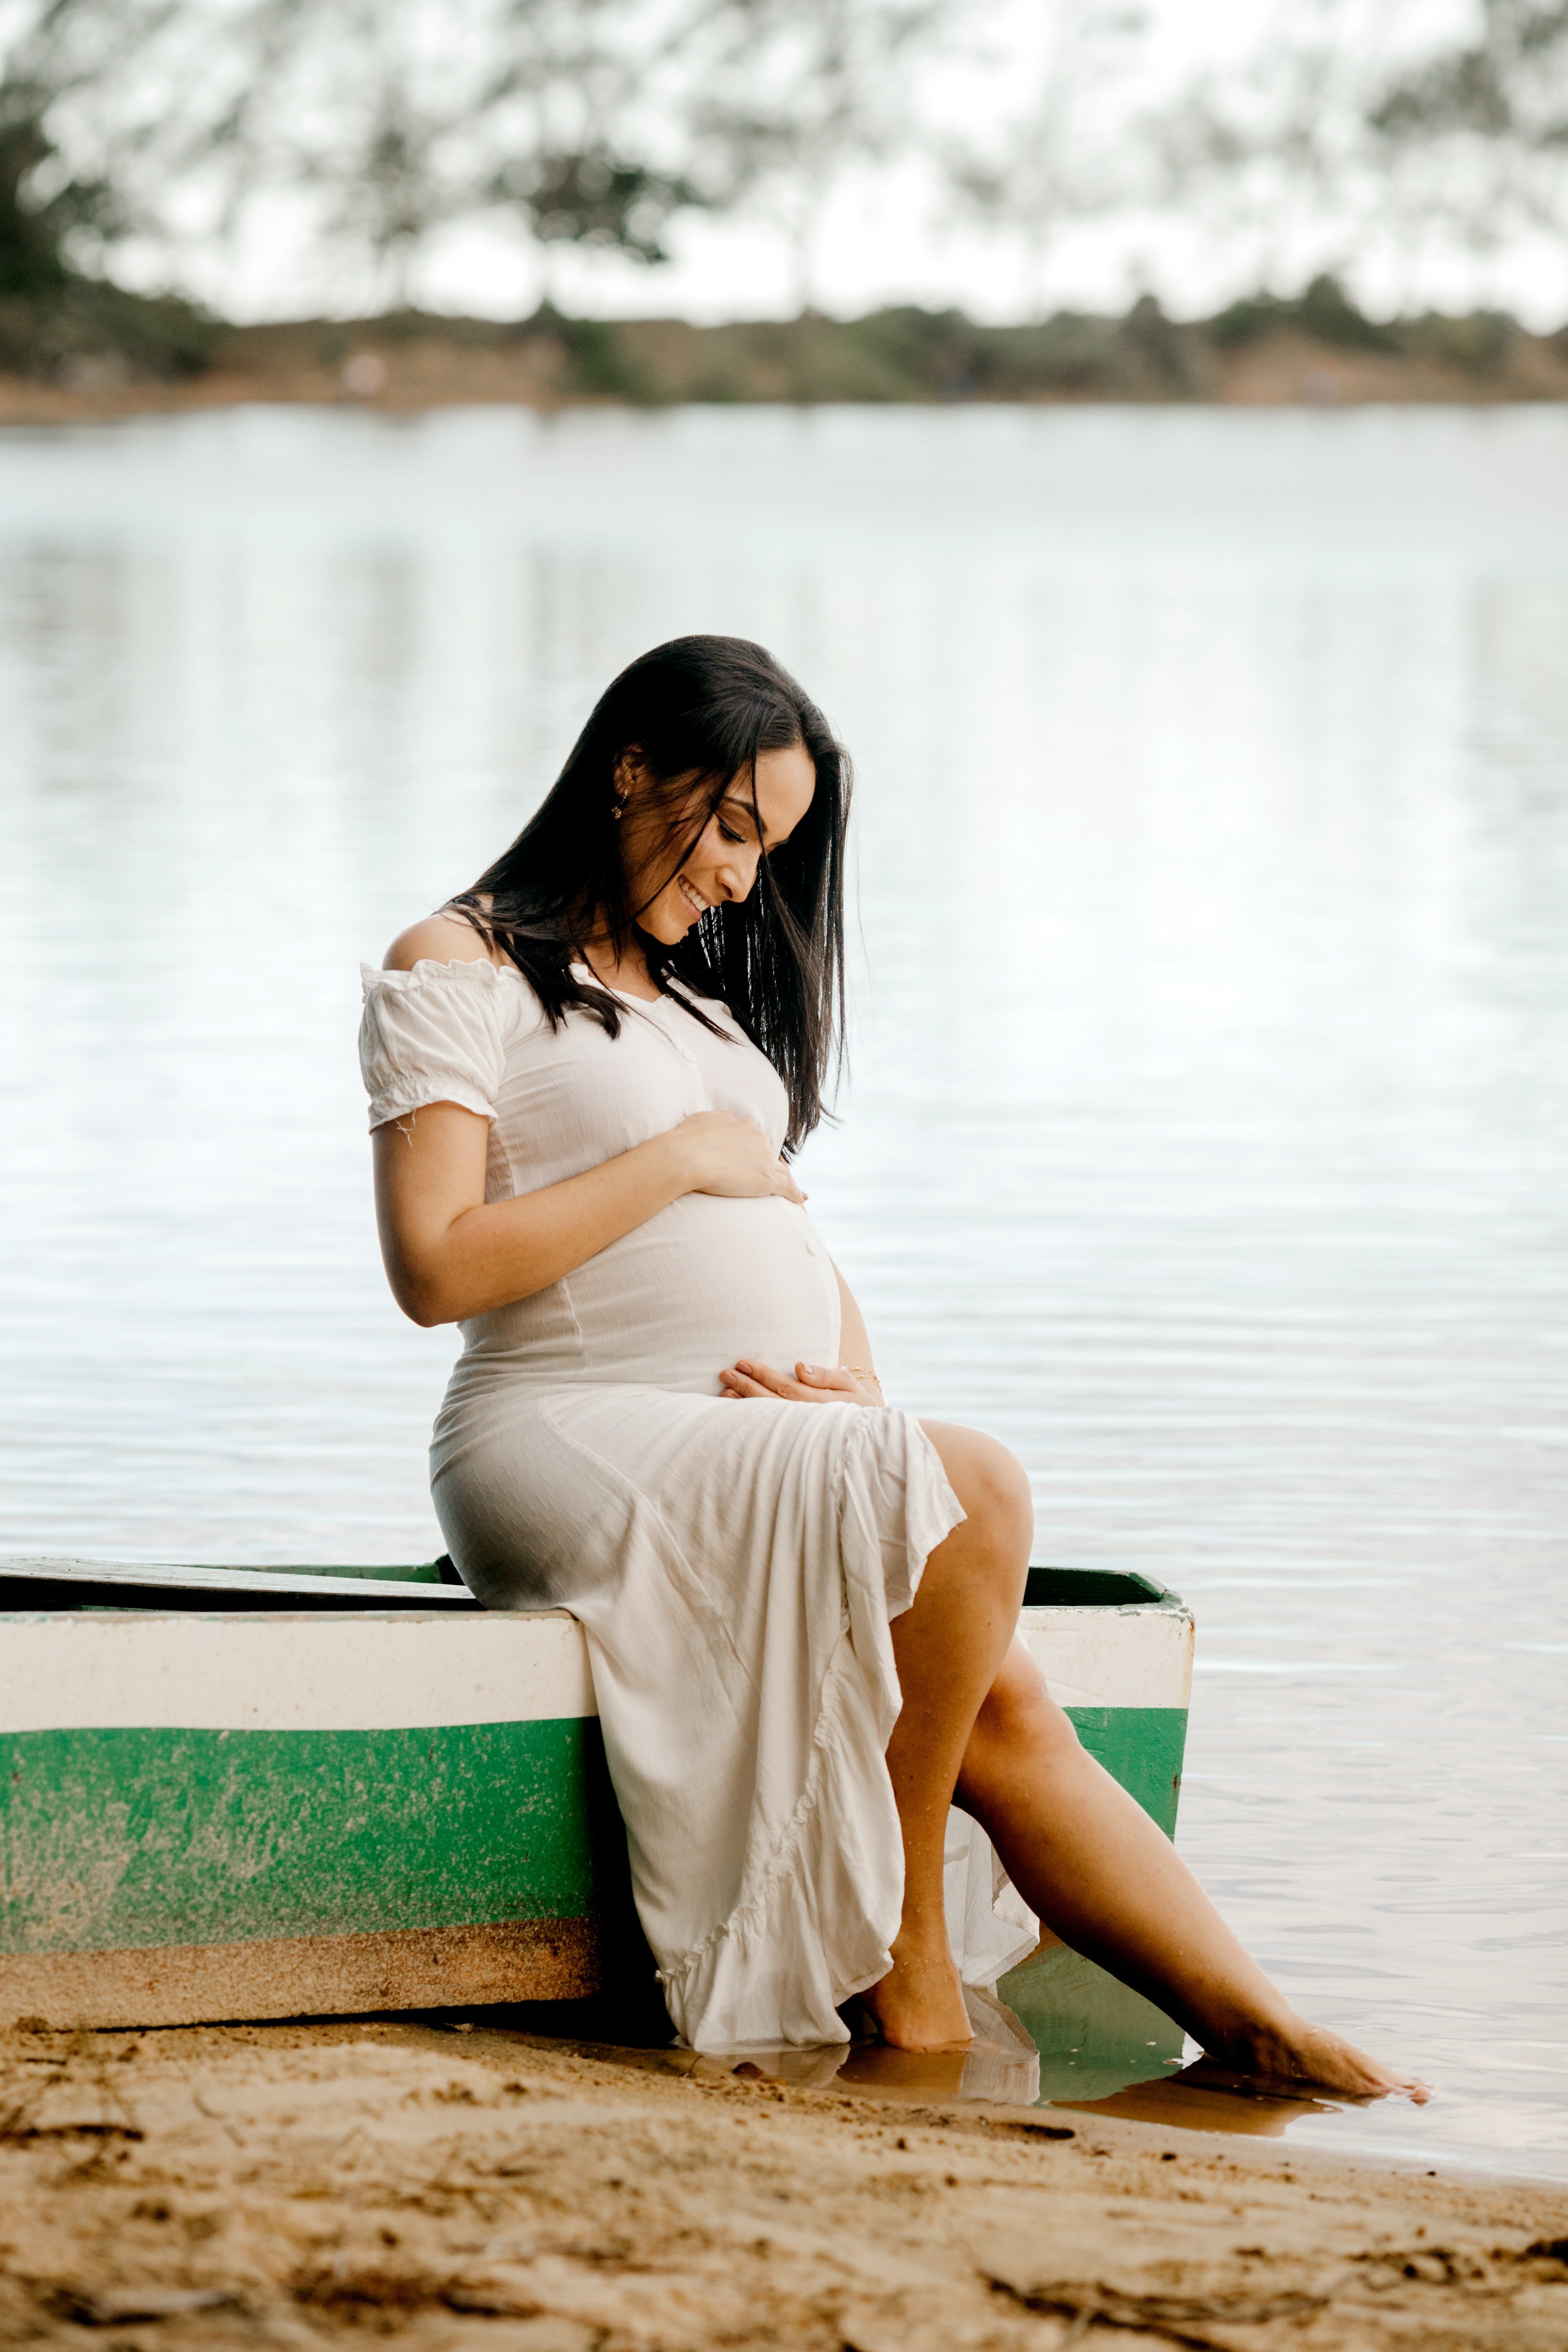 Sally was delighted to be pregnant. | Source: Unsplash